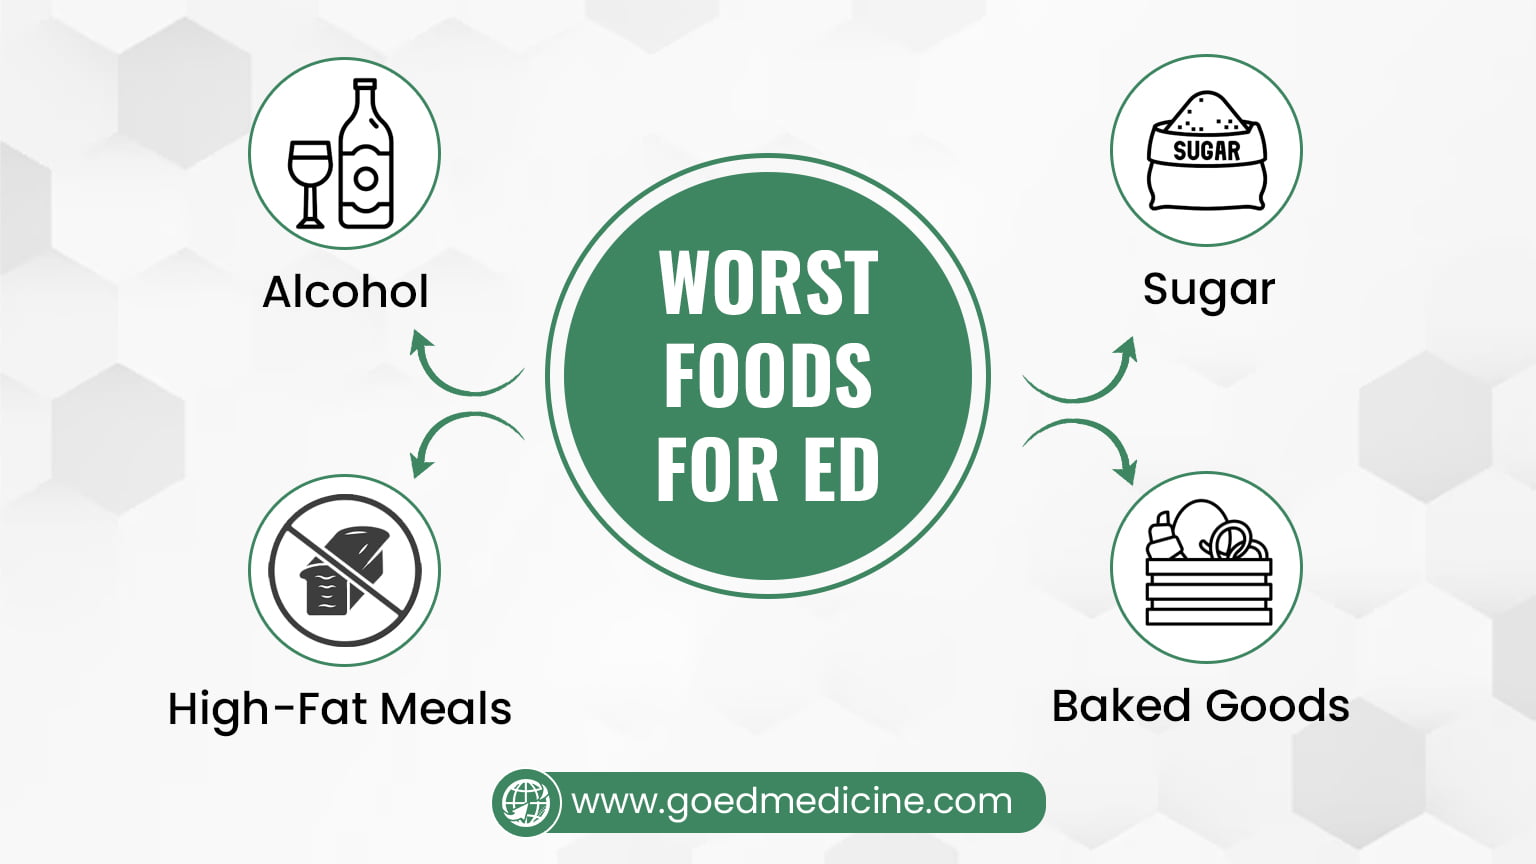 Worst Foods for ED